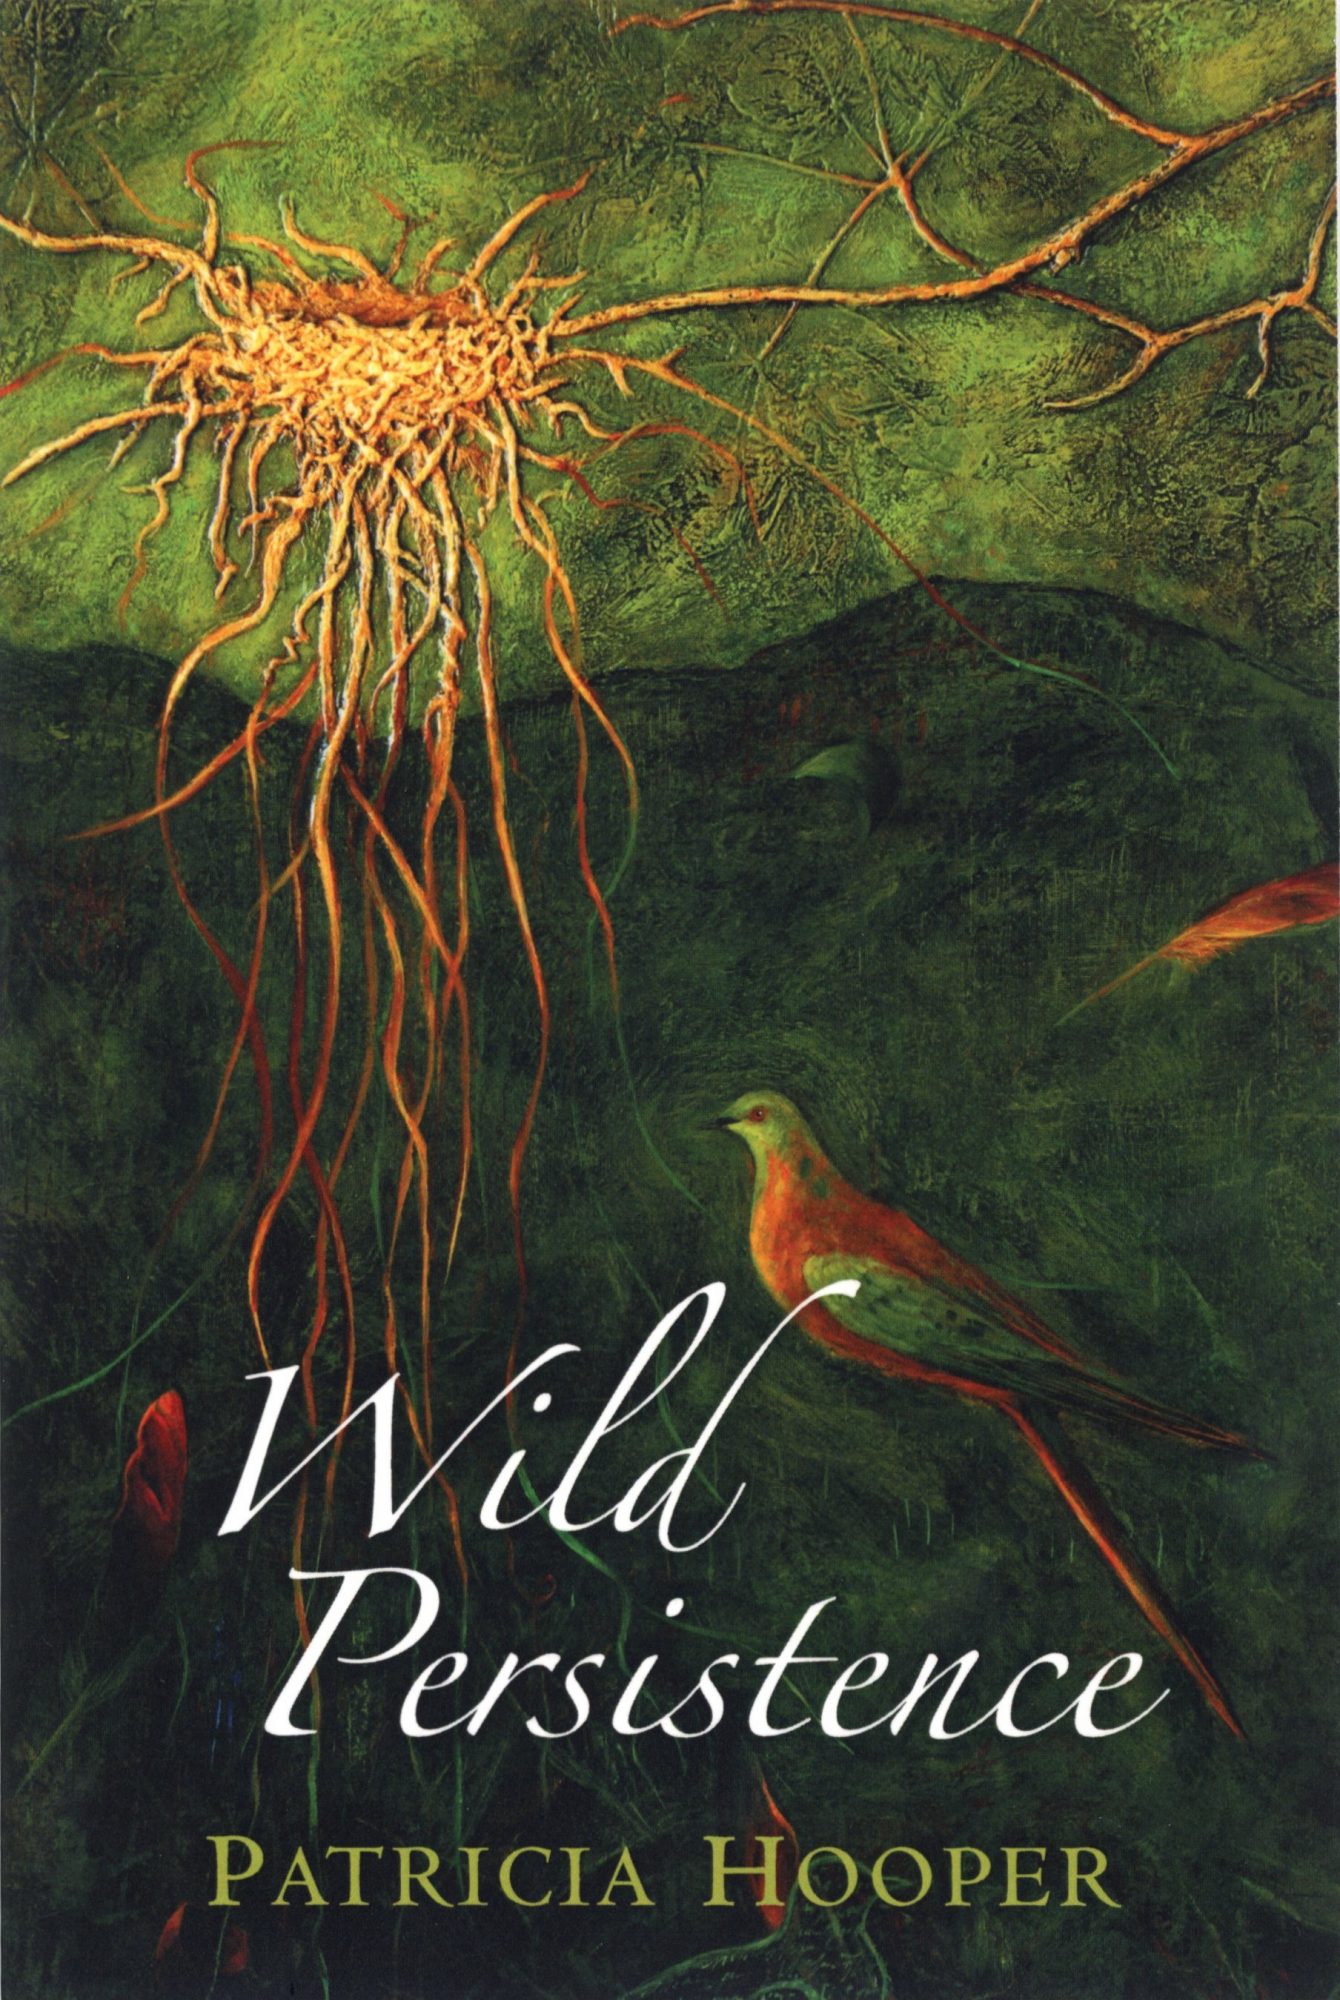 Image of the front cover of Wild Persistence.